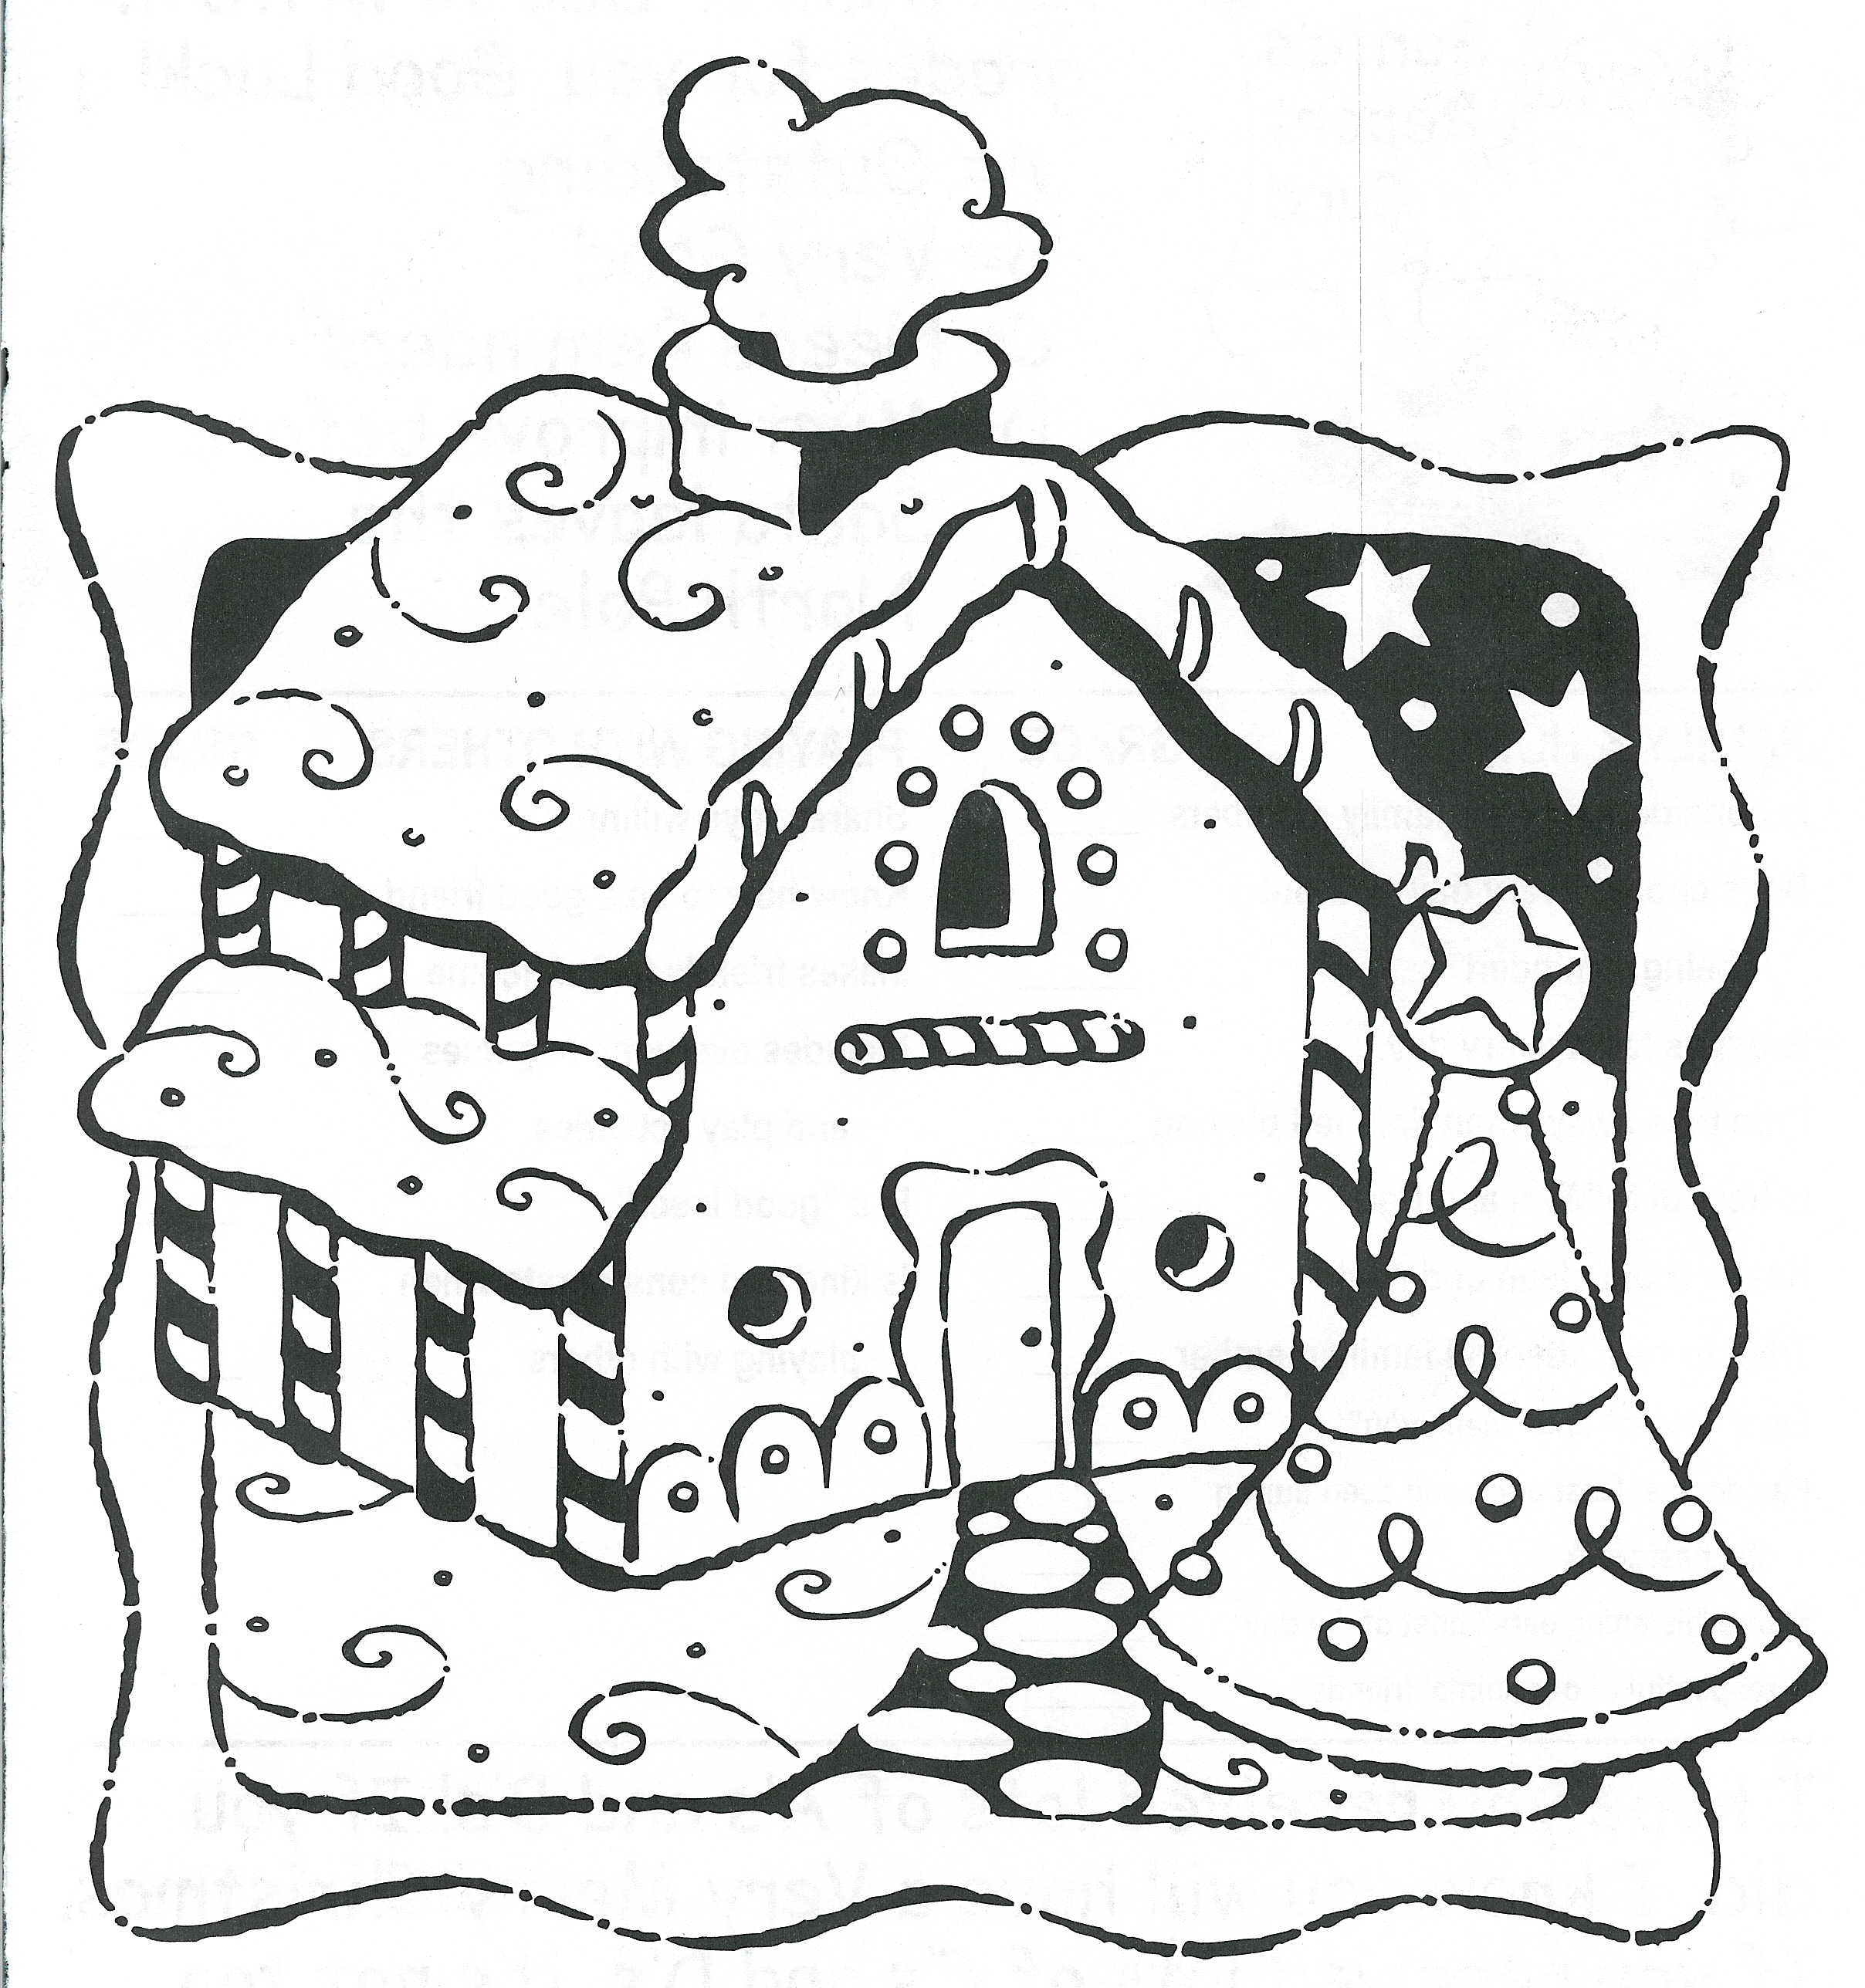 Gingerbread house coloring pages to download and print for free